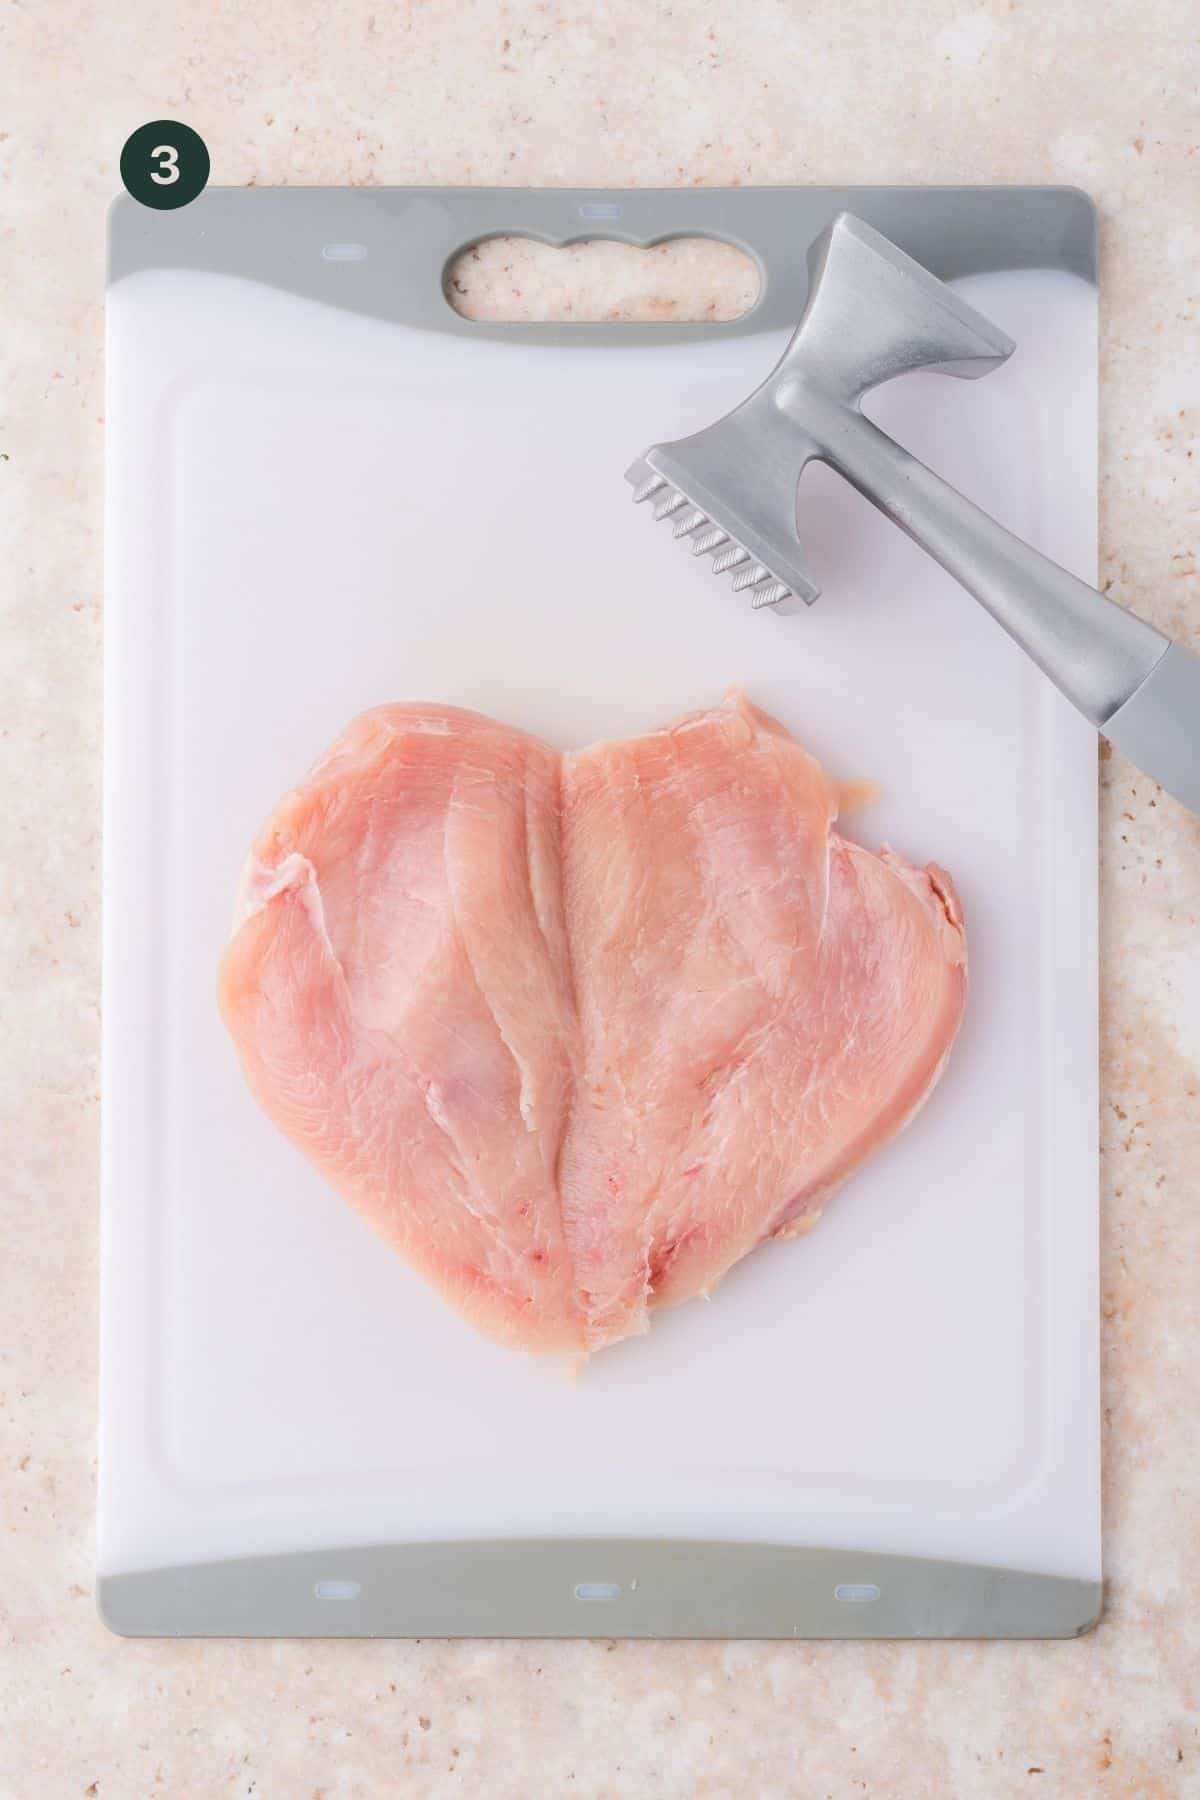 Butterflied chicken breast with a meat pounder to pound out to even thickness.